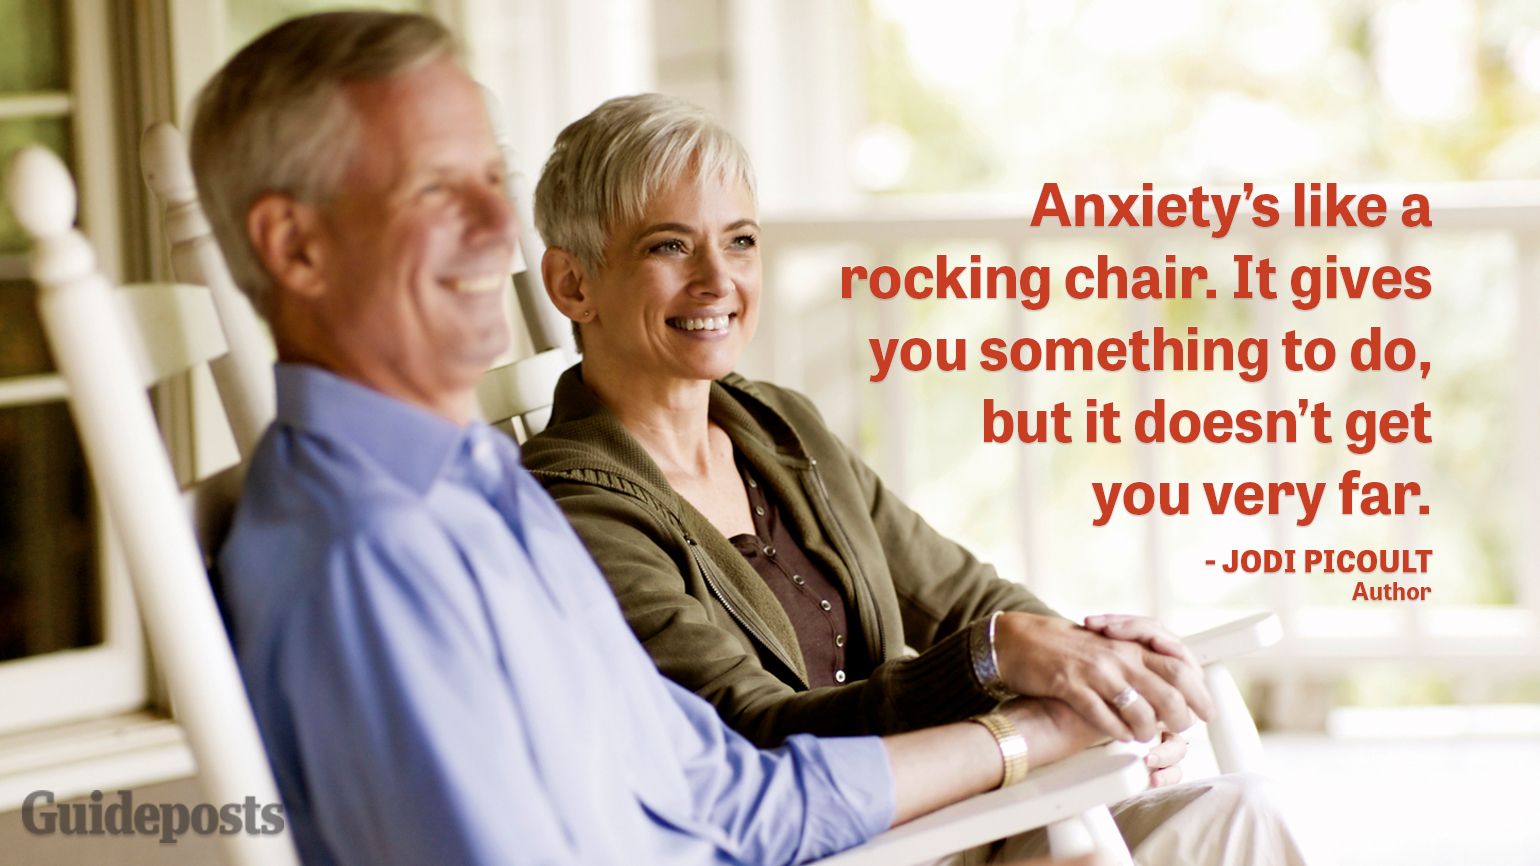 Anxiety's like a rocking chair. It gives you something to do, but it doesn't get you very far.